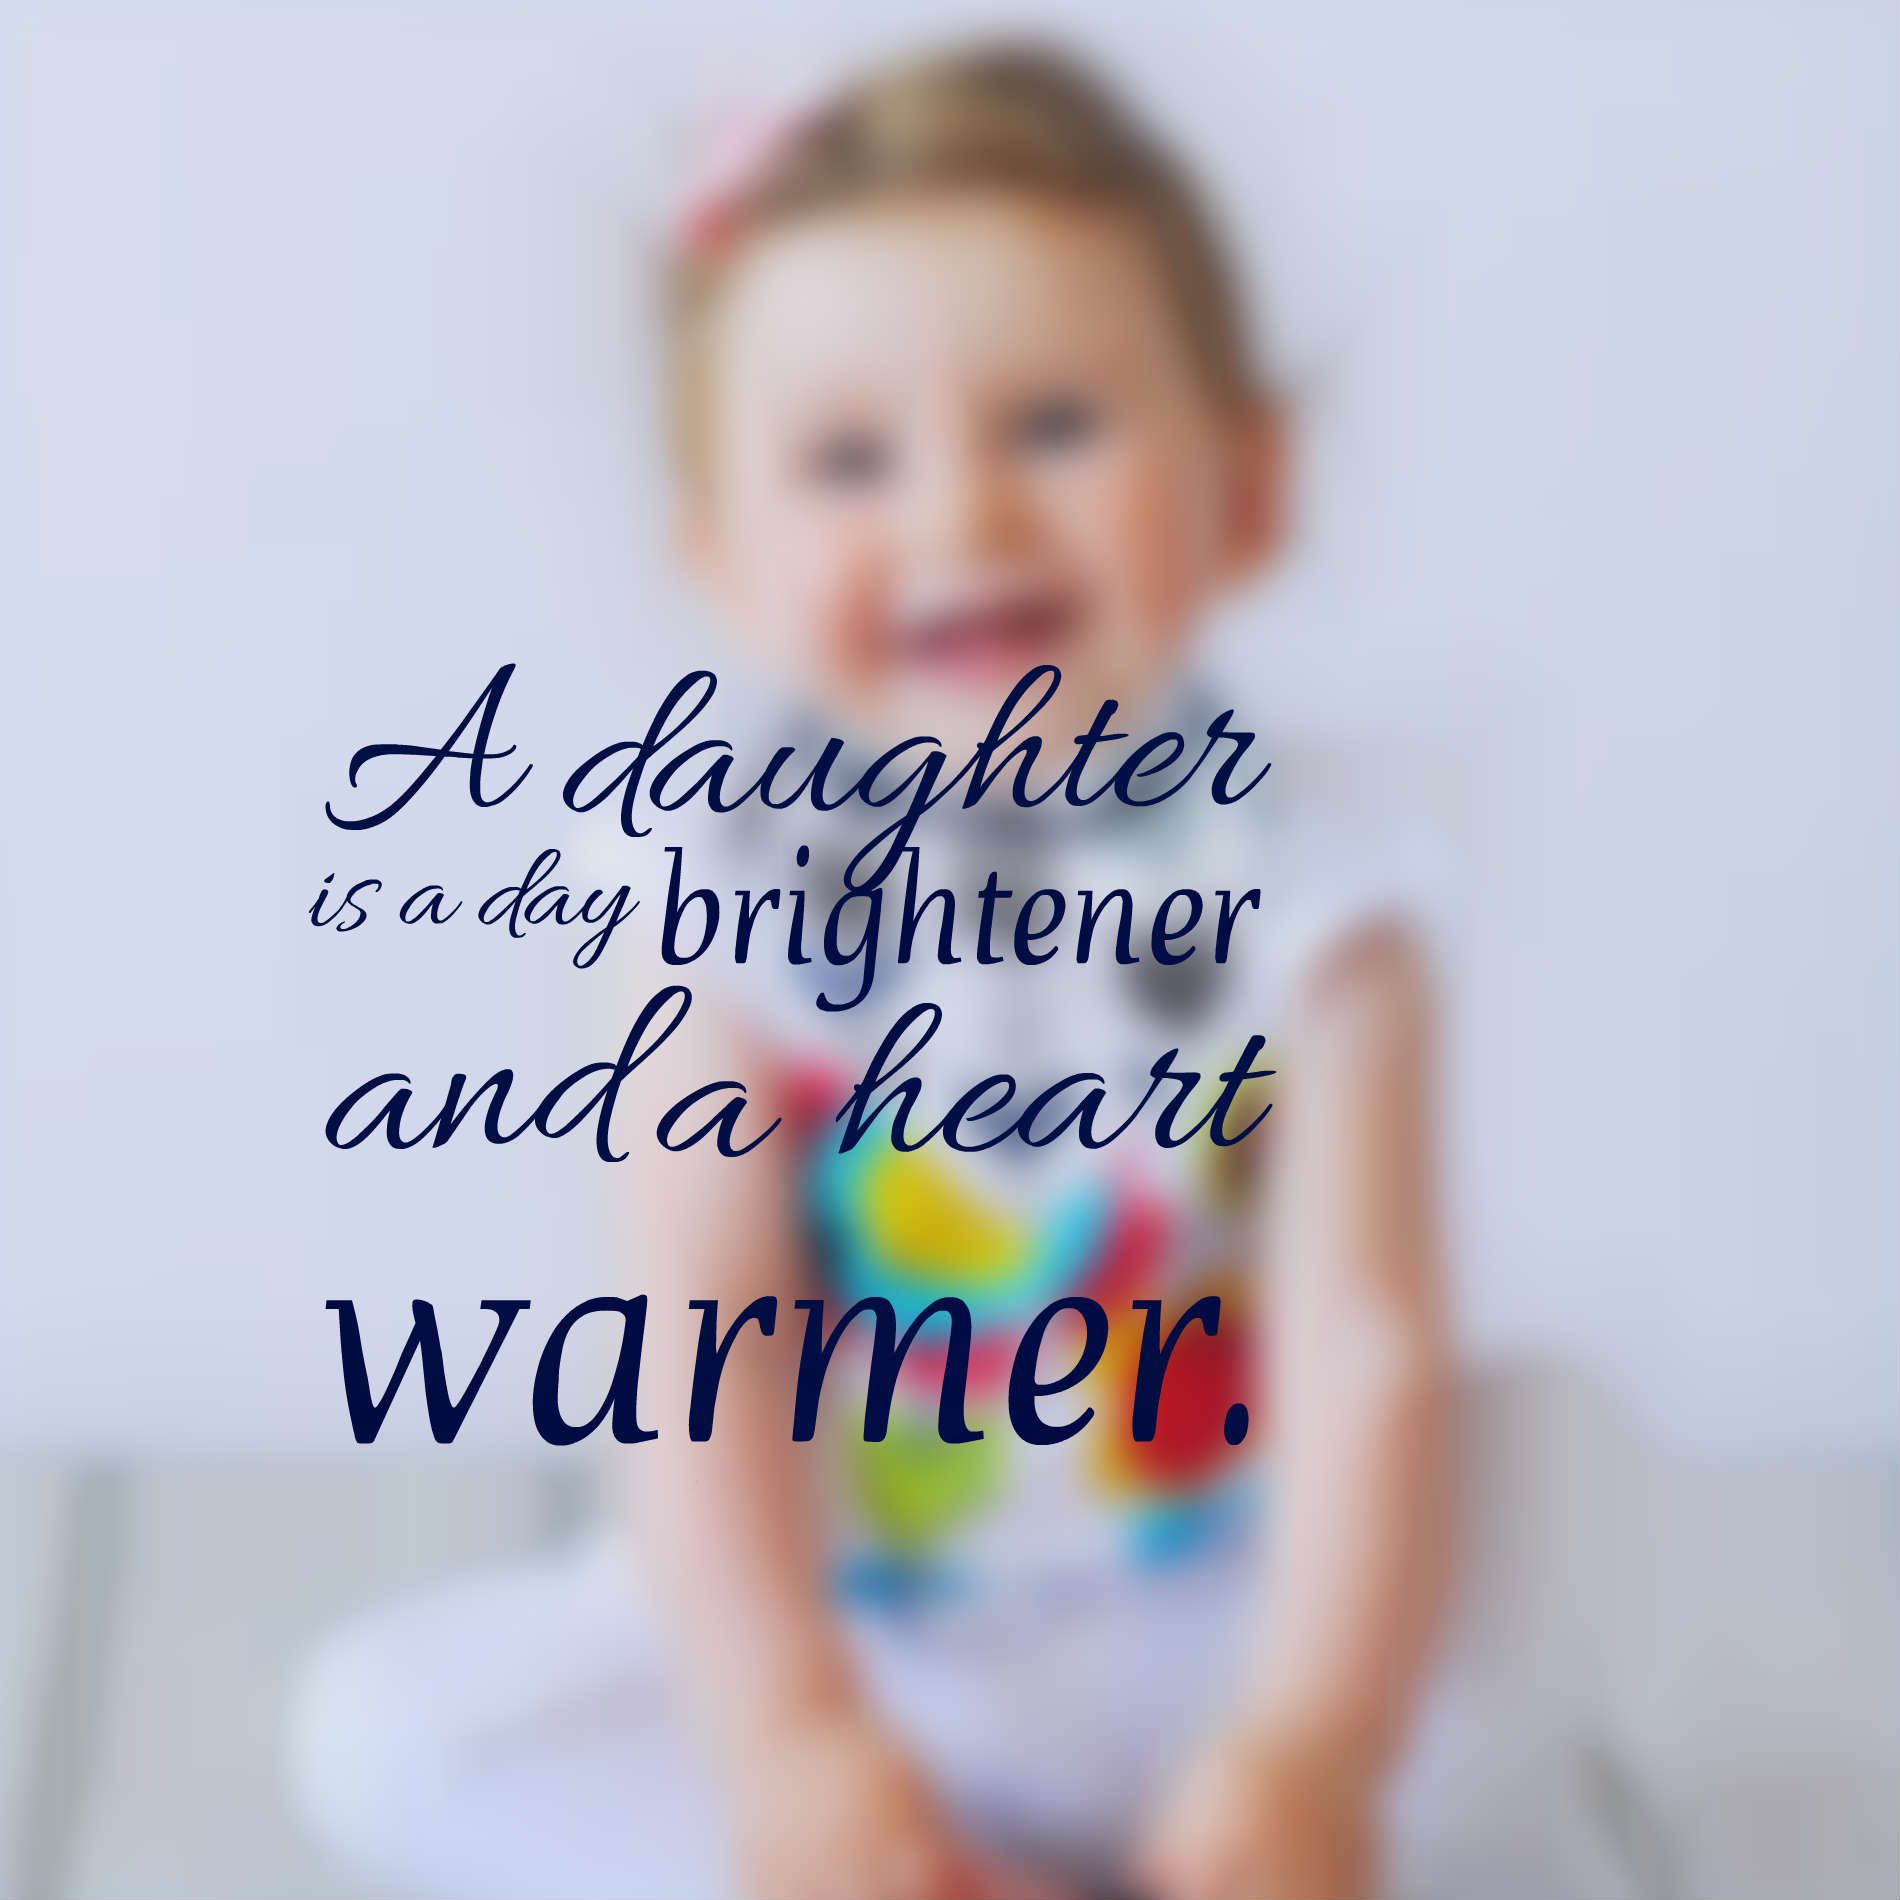 a daughter is a day brightener and a heart warmer.